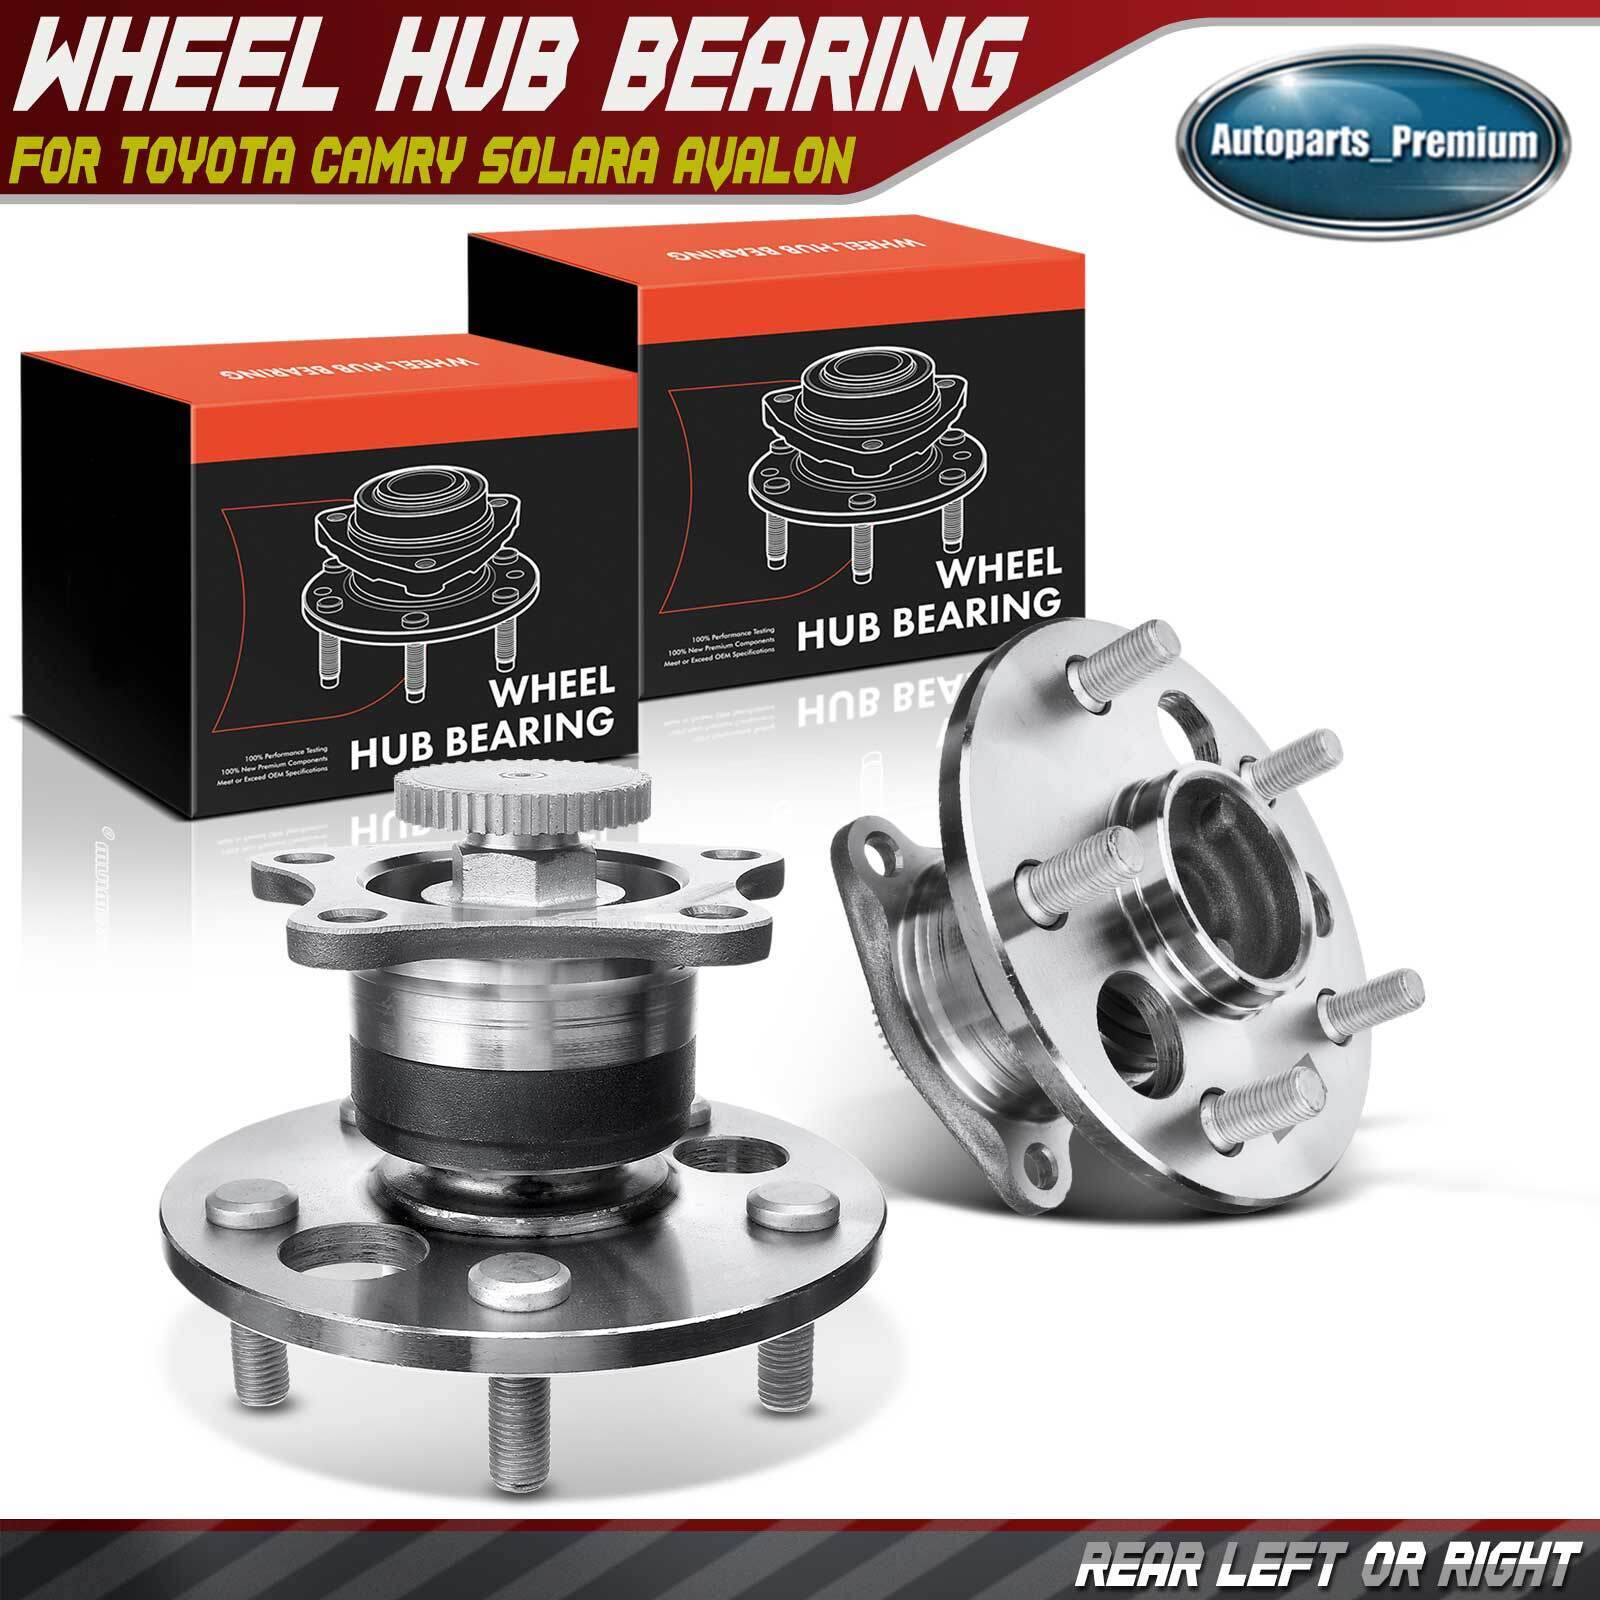 Rear L & R Wheel Bearing Hub Assembly for Lexus ES300 RX300 Toyota Avalon Camry